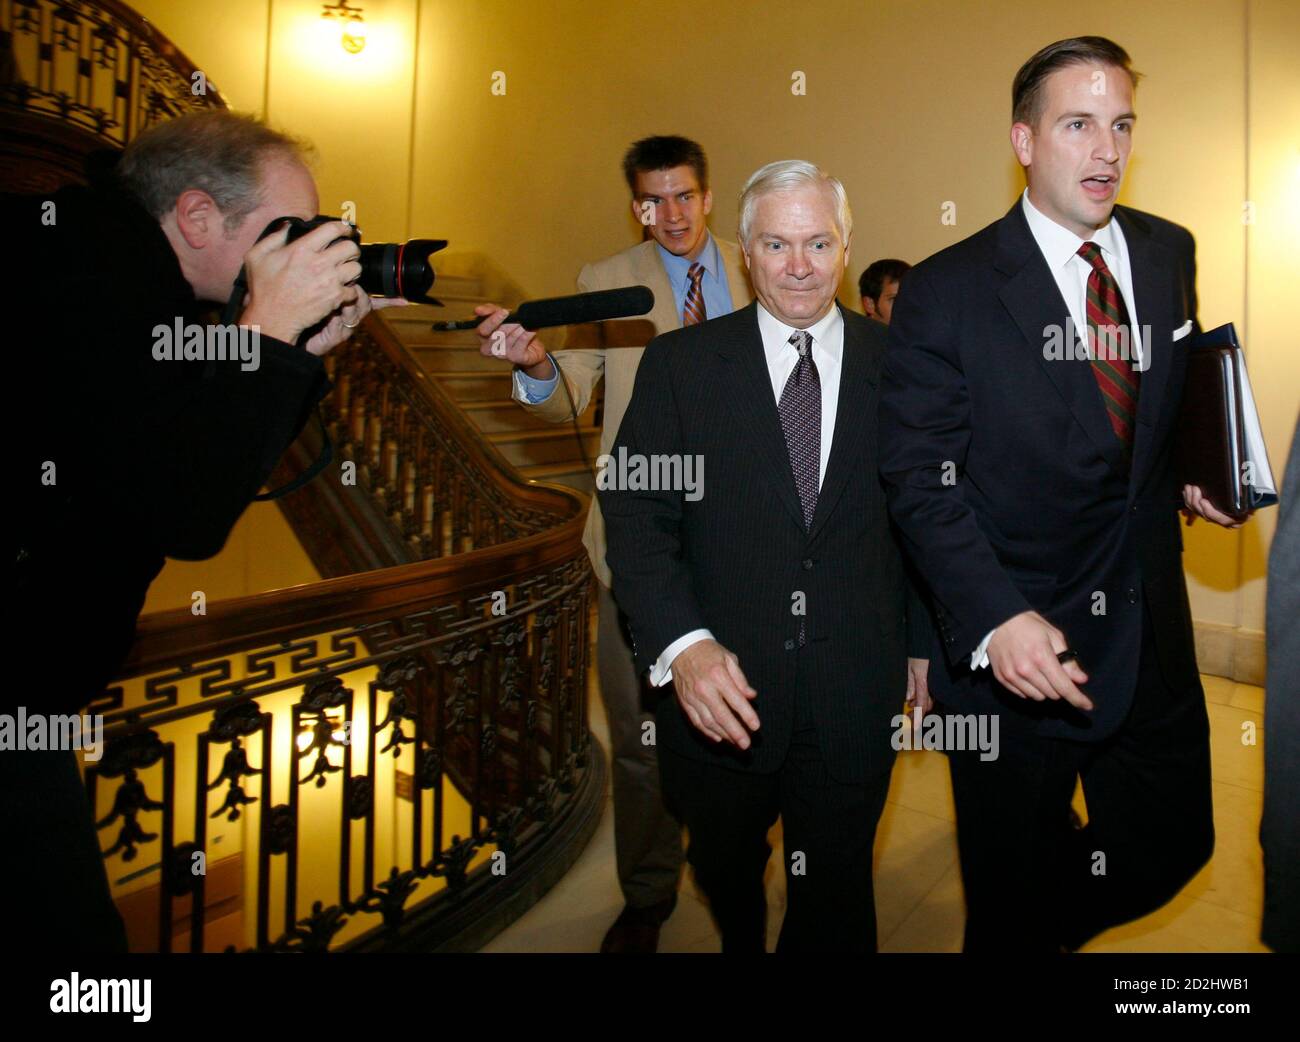 U.S. Secretary of Defense nominee Robert Gates (C) is followed by the press (L) and ushered by staff (R) from the Russell Senate Office building following a meeting with U.S. Senator Carl Levin on Capitol Hill in Washington, November 20, 2006. Gates is expected to begin Senate confirmation hearings on his appointment to replace Donald Rumsfeld as Secretary of Defense in early December.    REUTERS/Jason Reed (UNITED STATES) Stock Photo